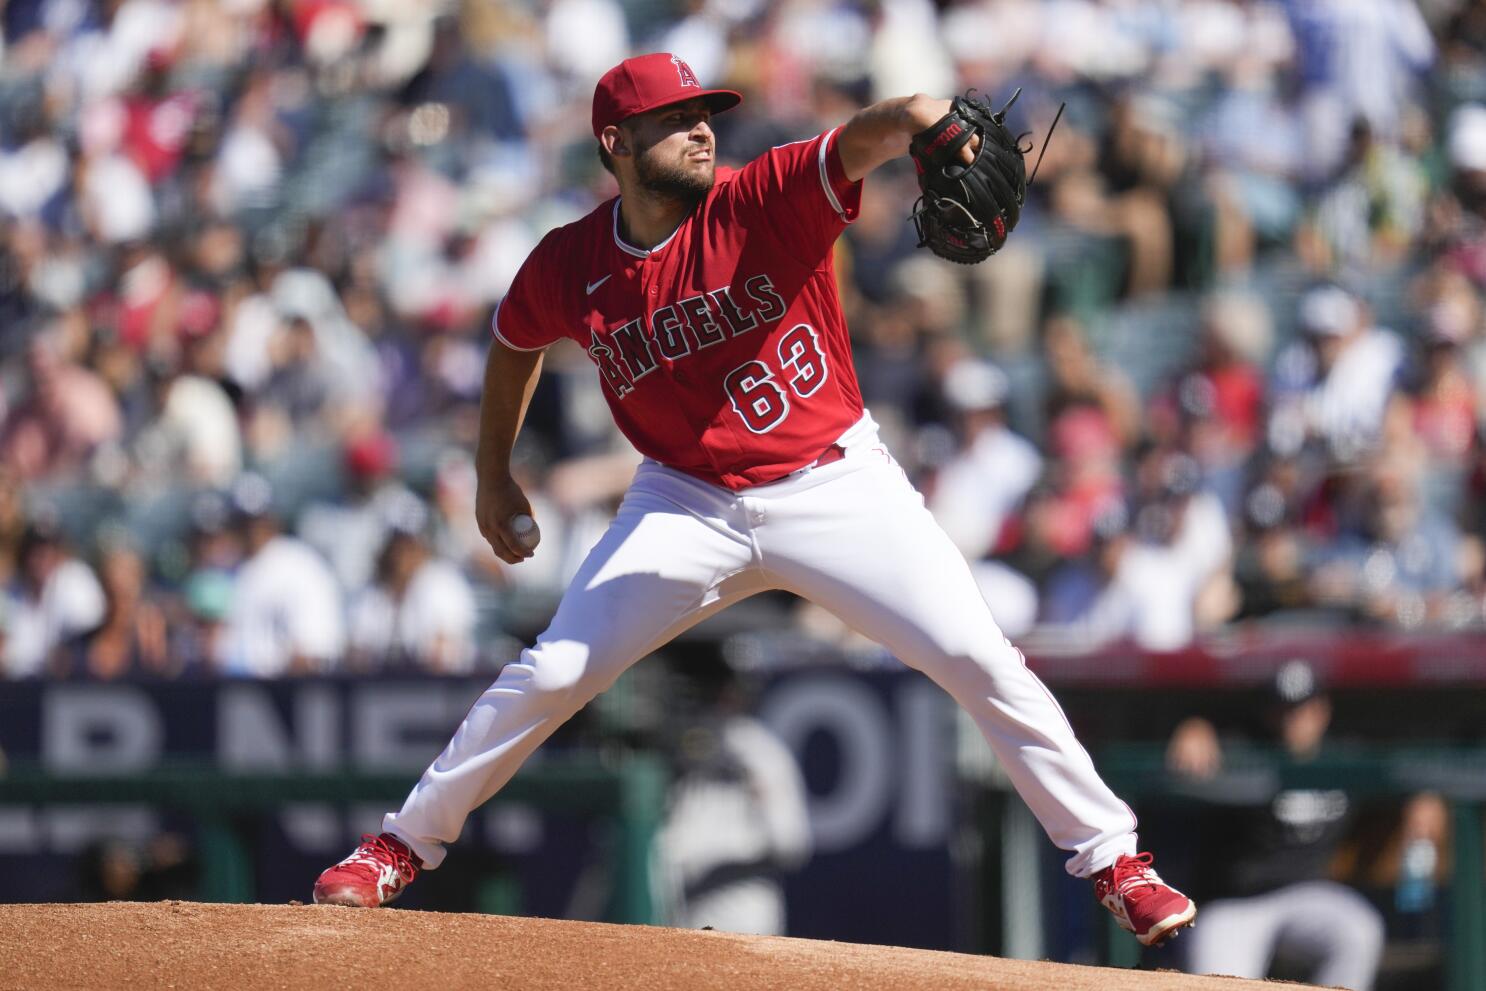 Angels complete sweep of Yankees with 7-3 win, finishing New